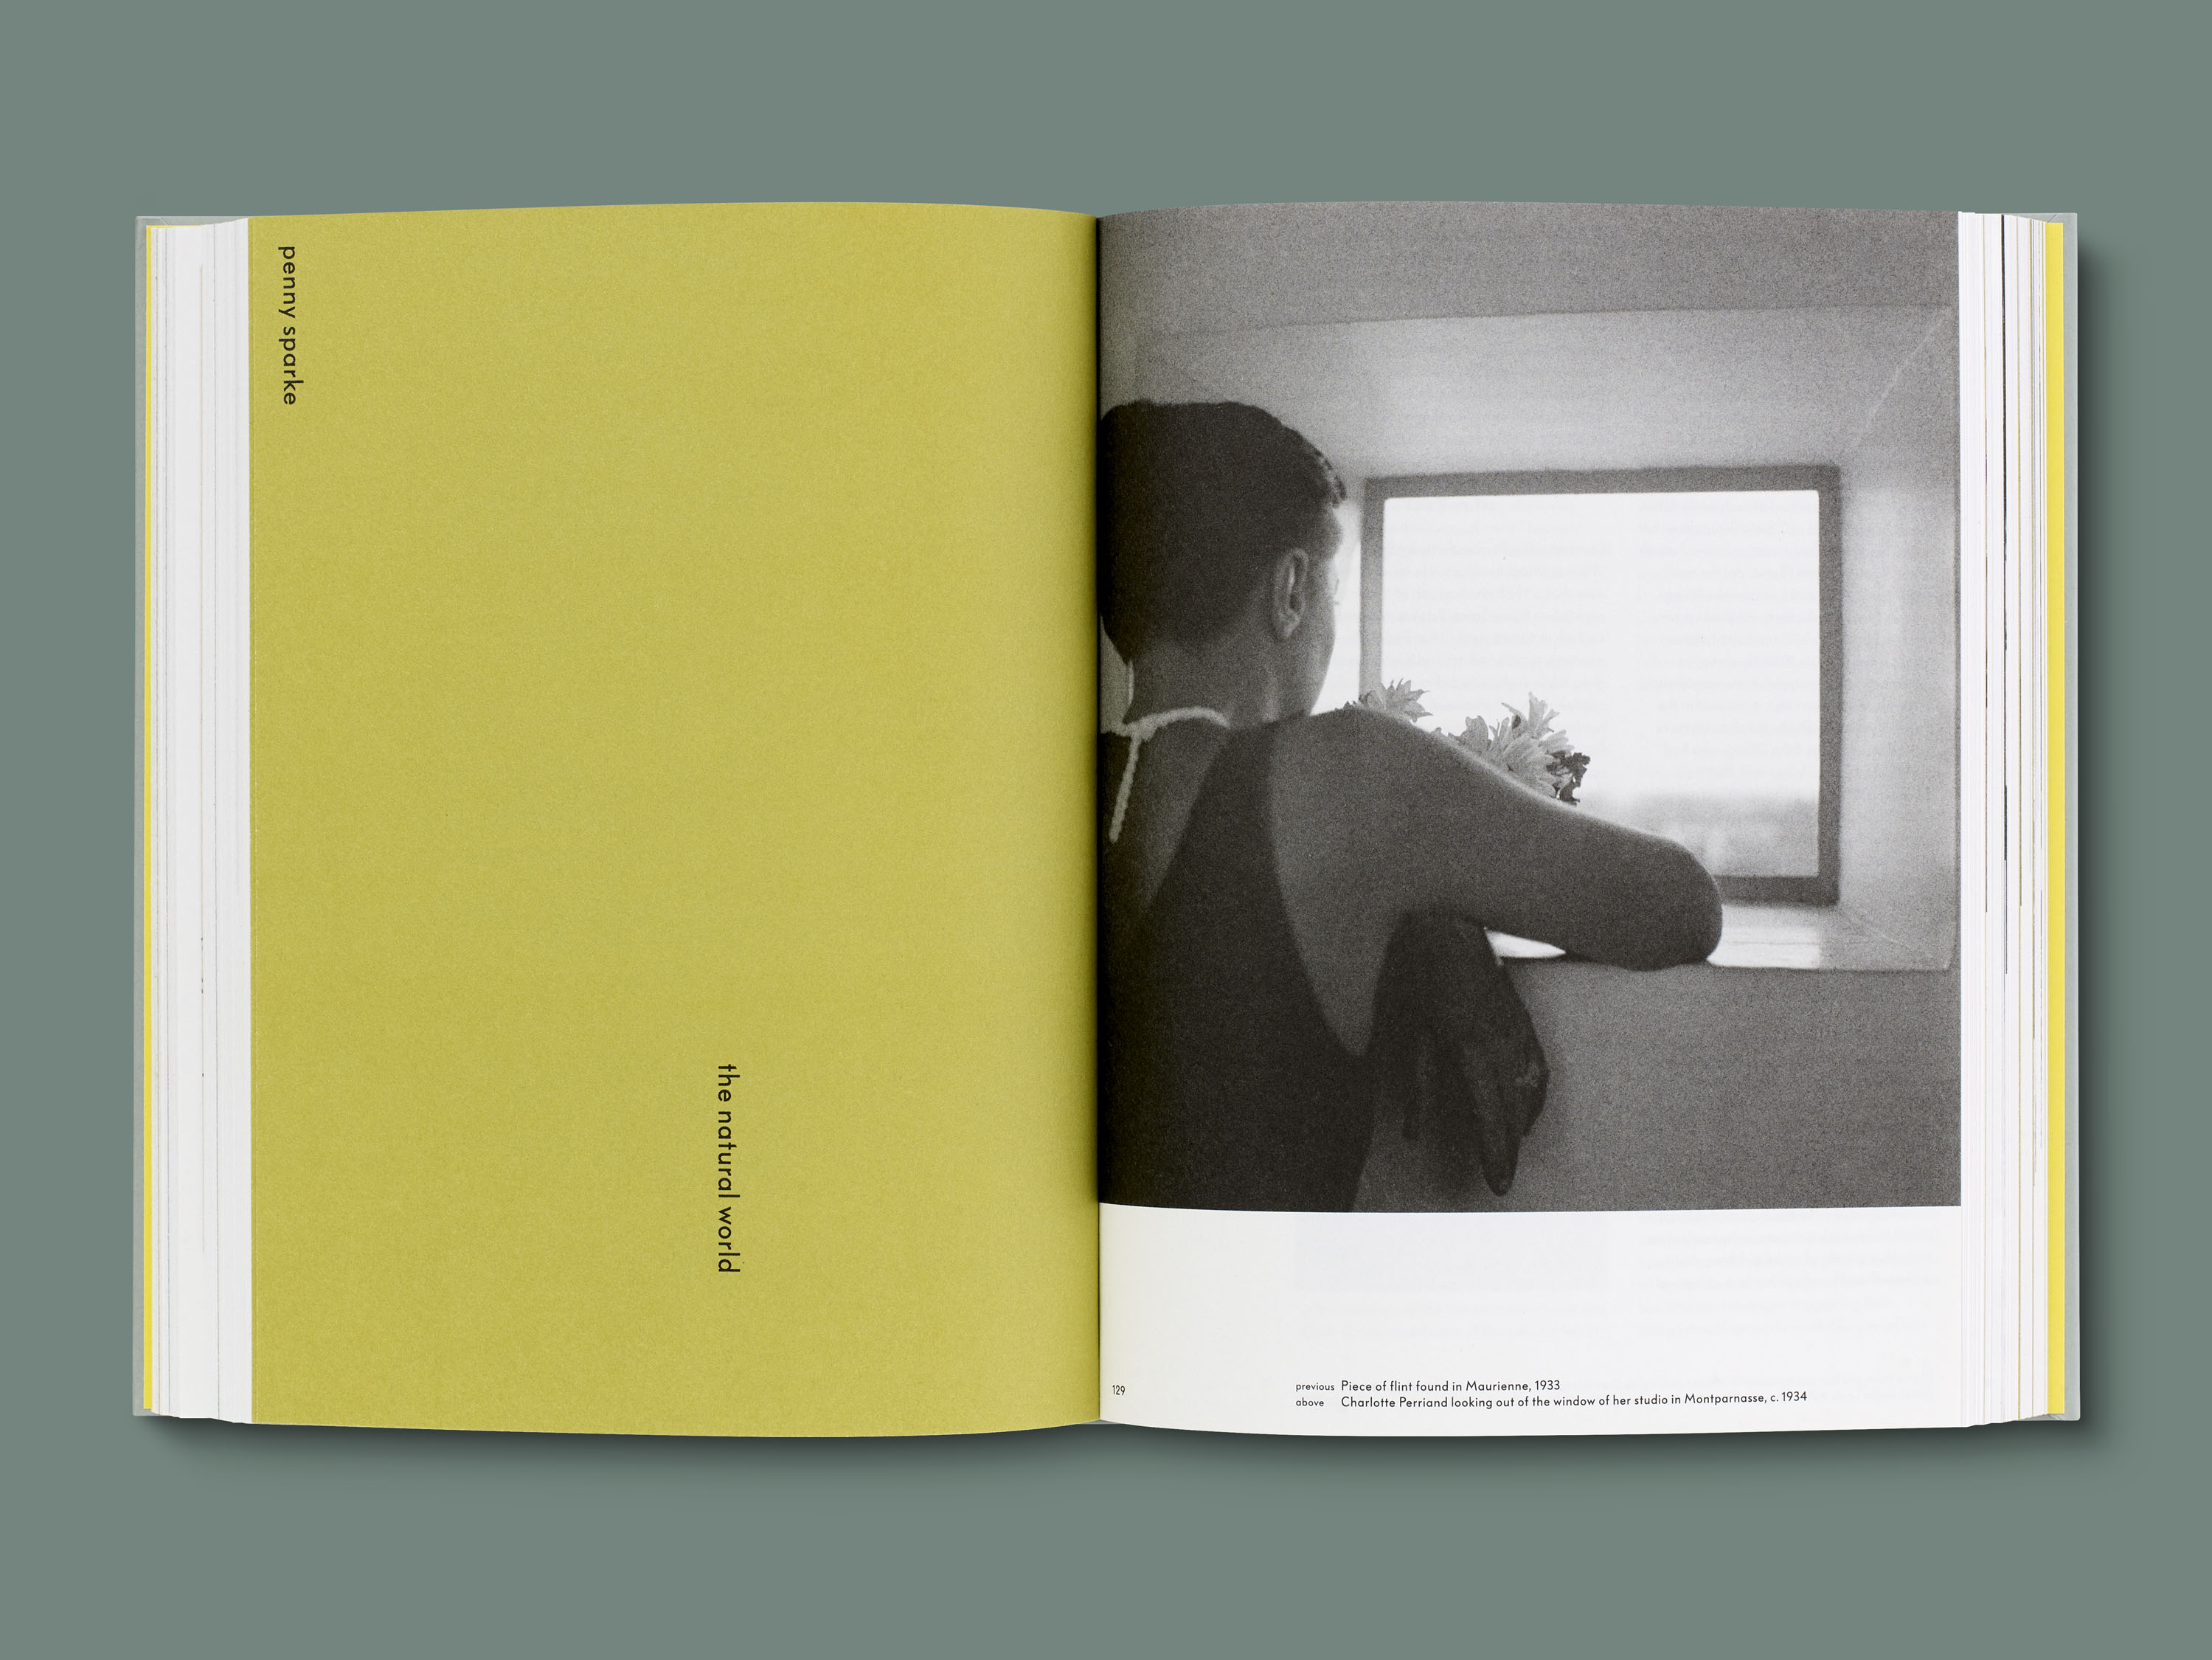 Charlotte Perriand: The Modern Life → A Practice for Everyday Life